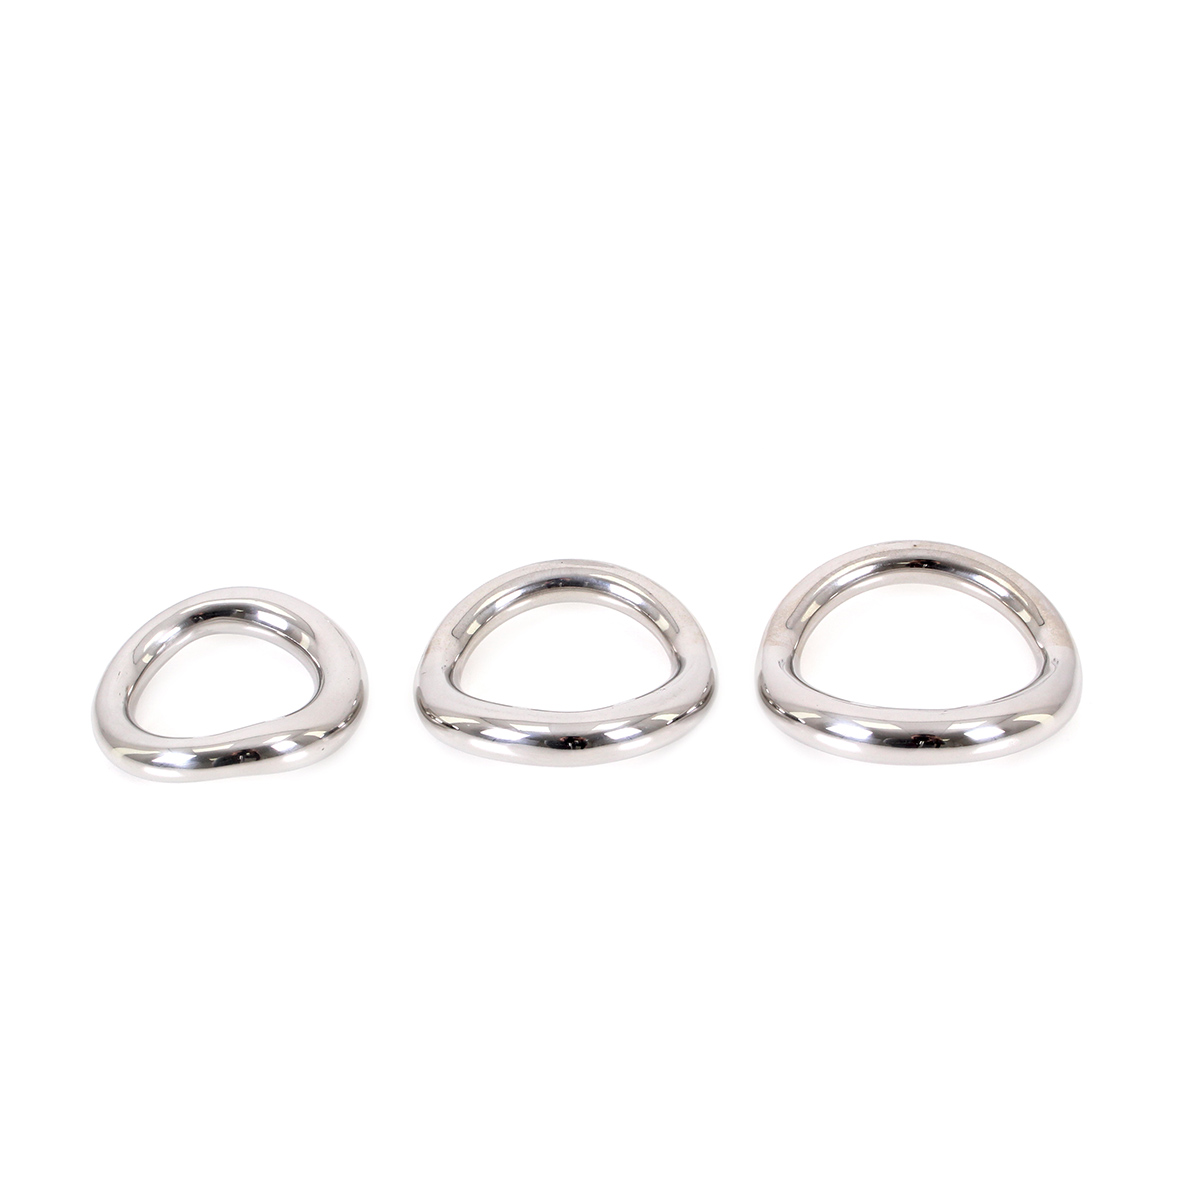 Costum-Fit-Cockring-45-mm-OPR-277045-4